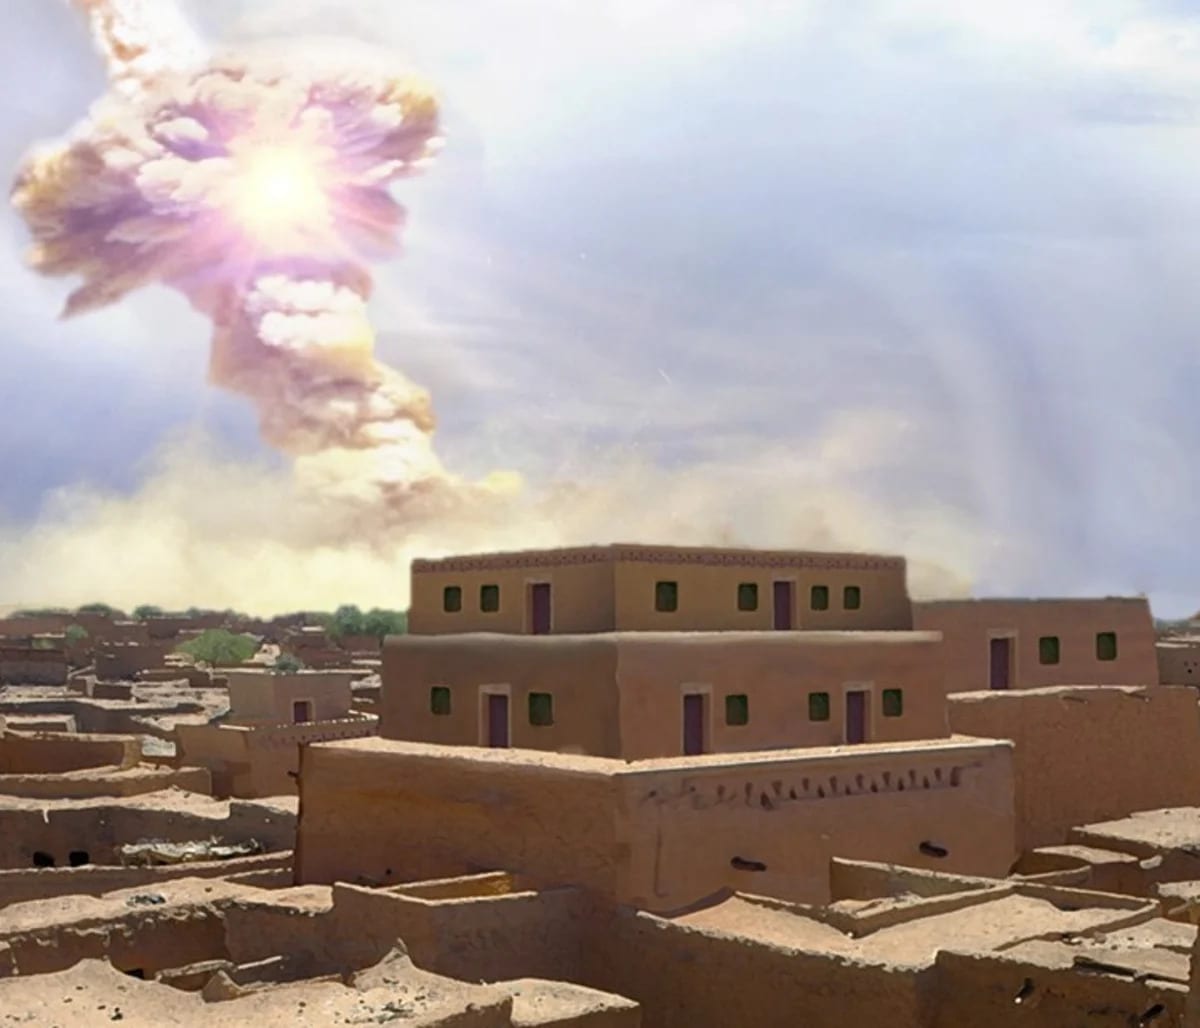 A giant space rock demolished an ancient Middle Eastern city and everyone in it – possibly inspiring the Biblical story of Sodom